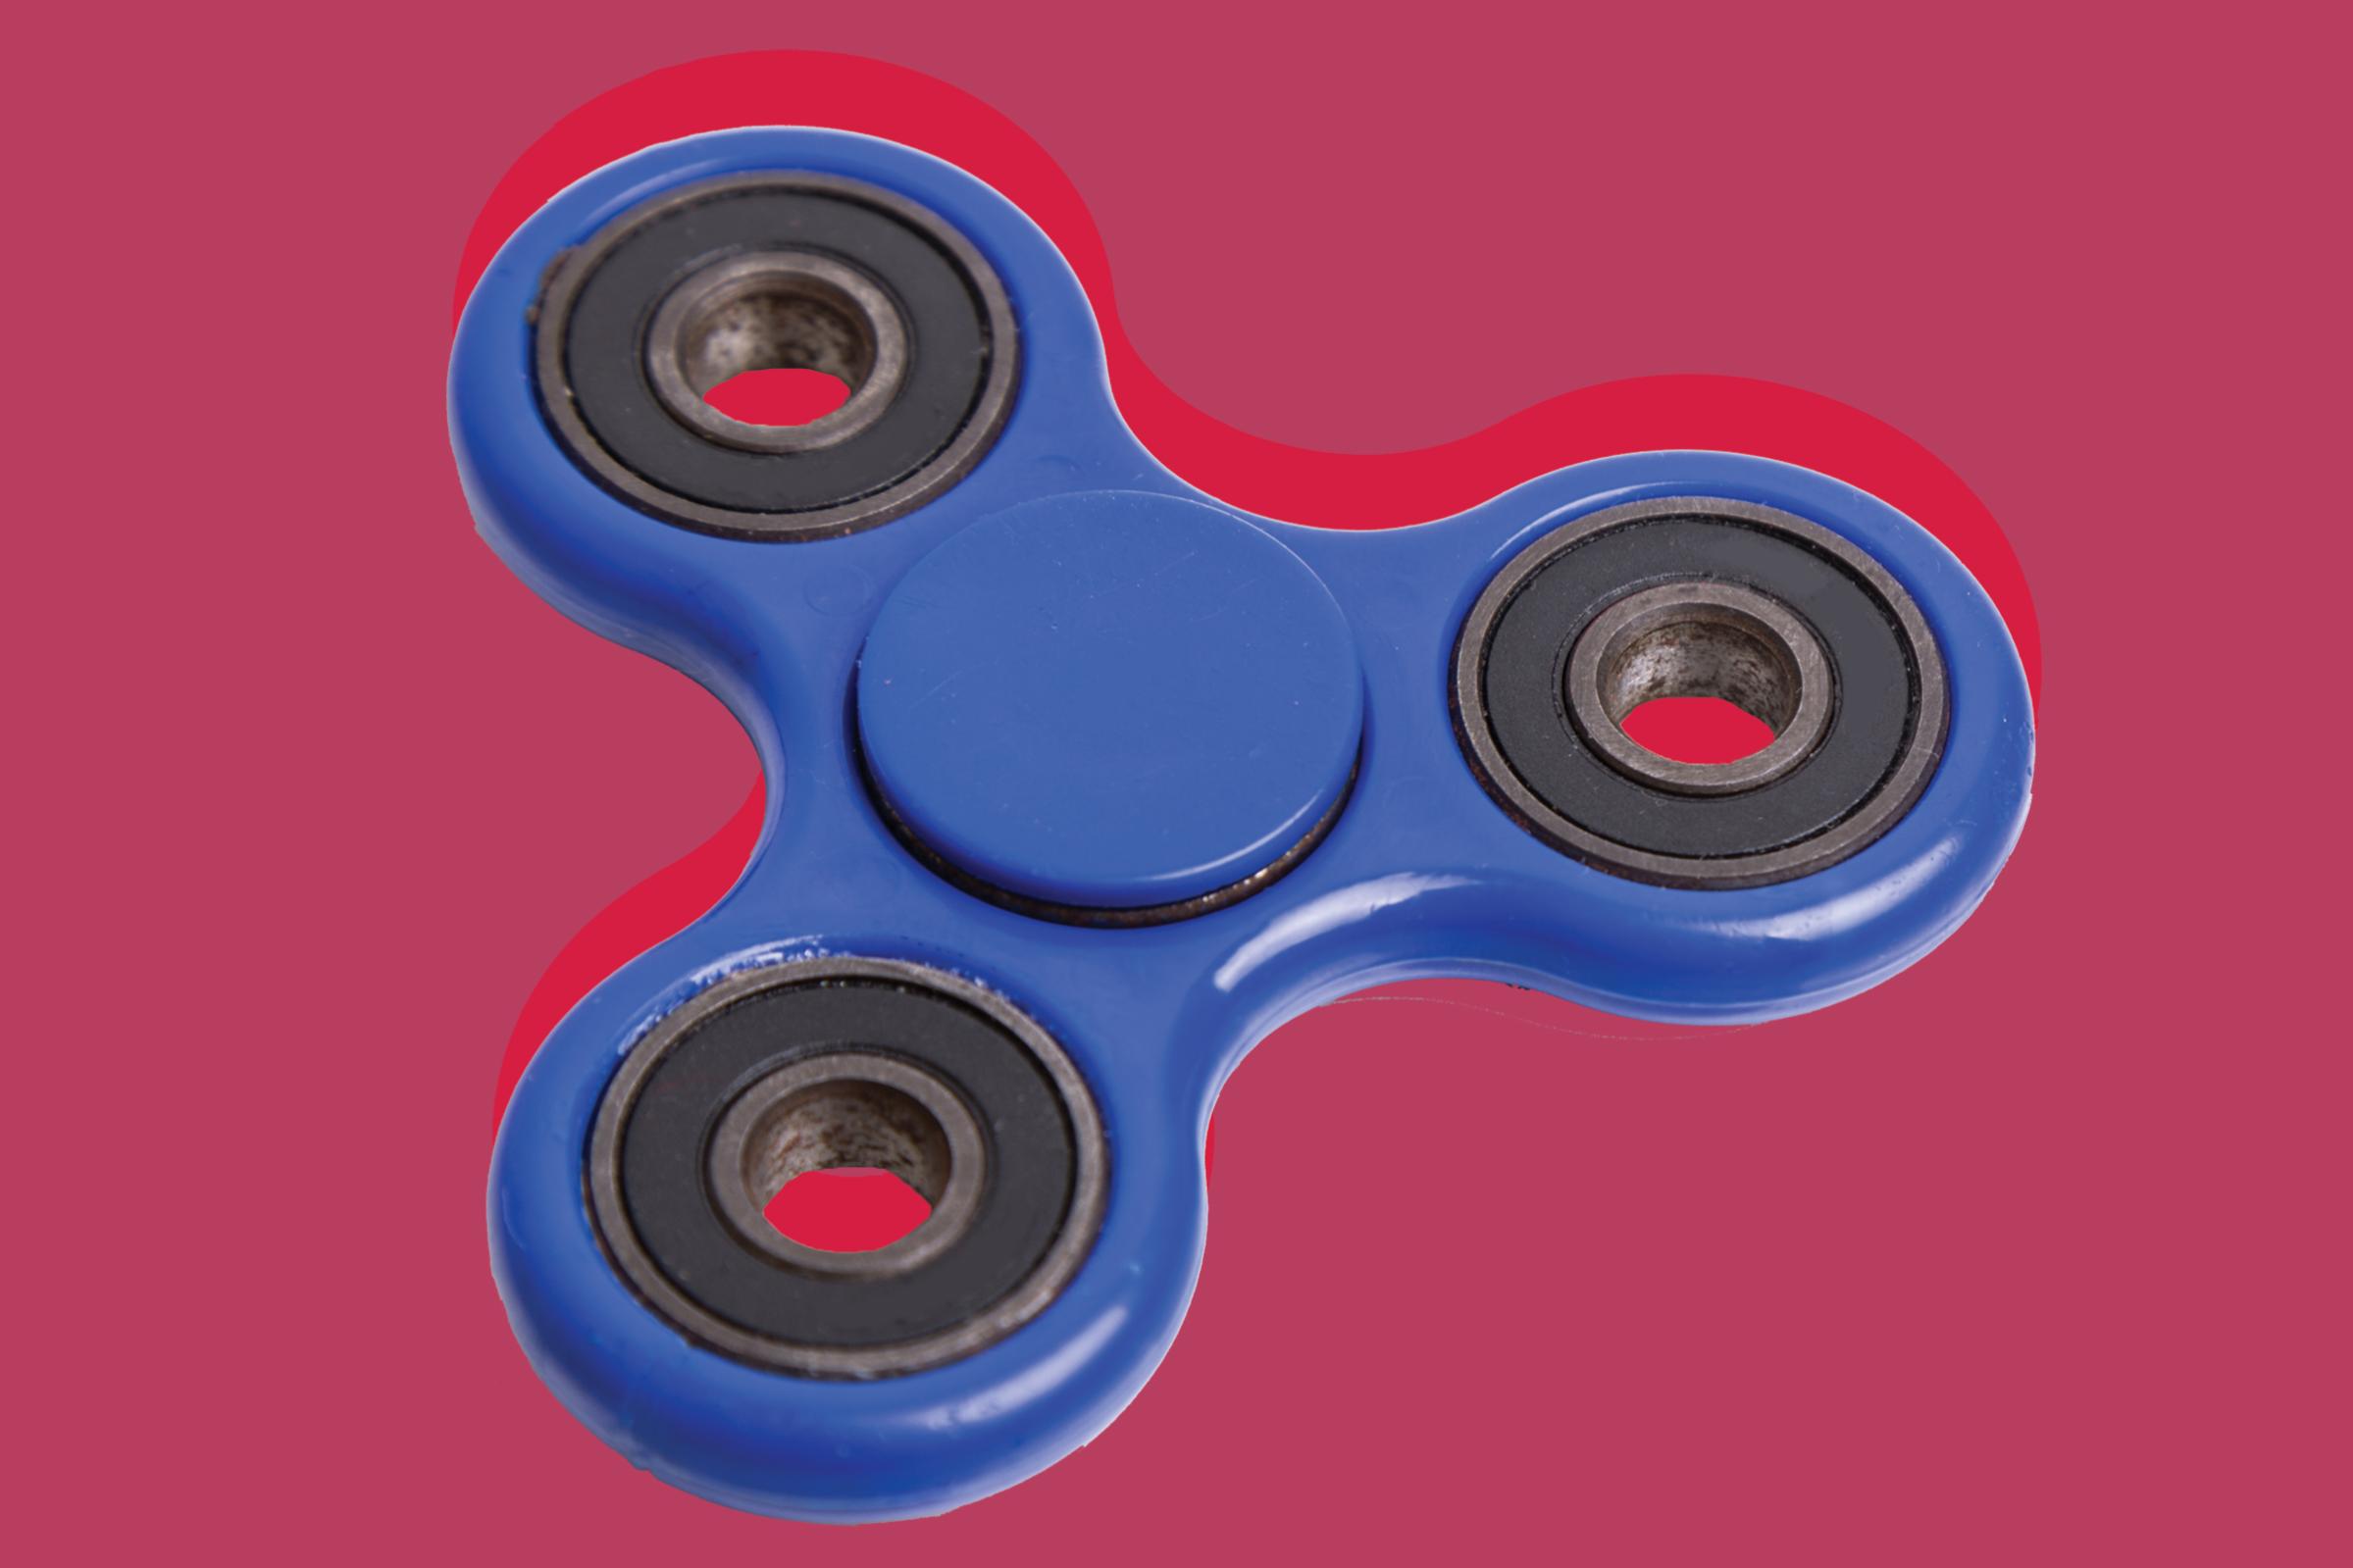 Fidget spinners are one of the best inventions of 2017